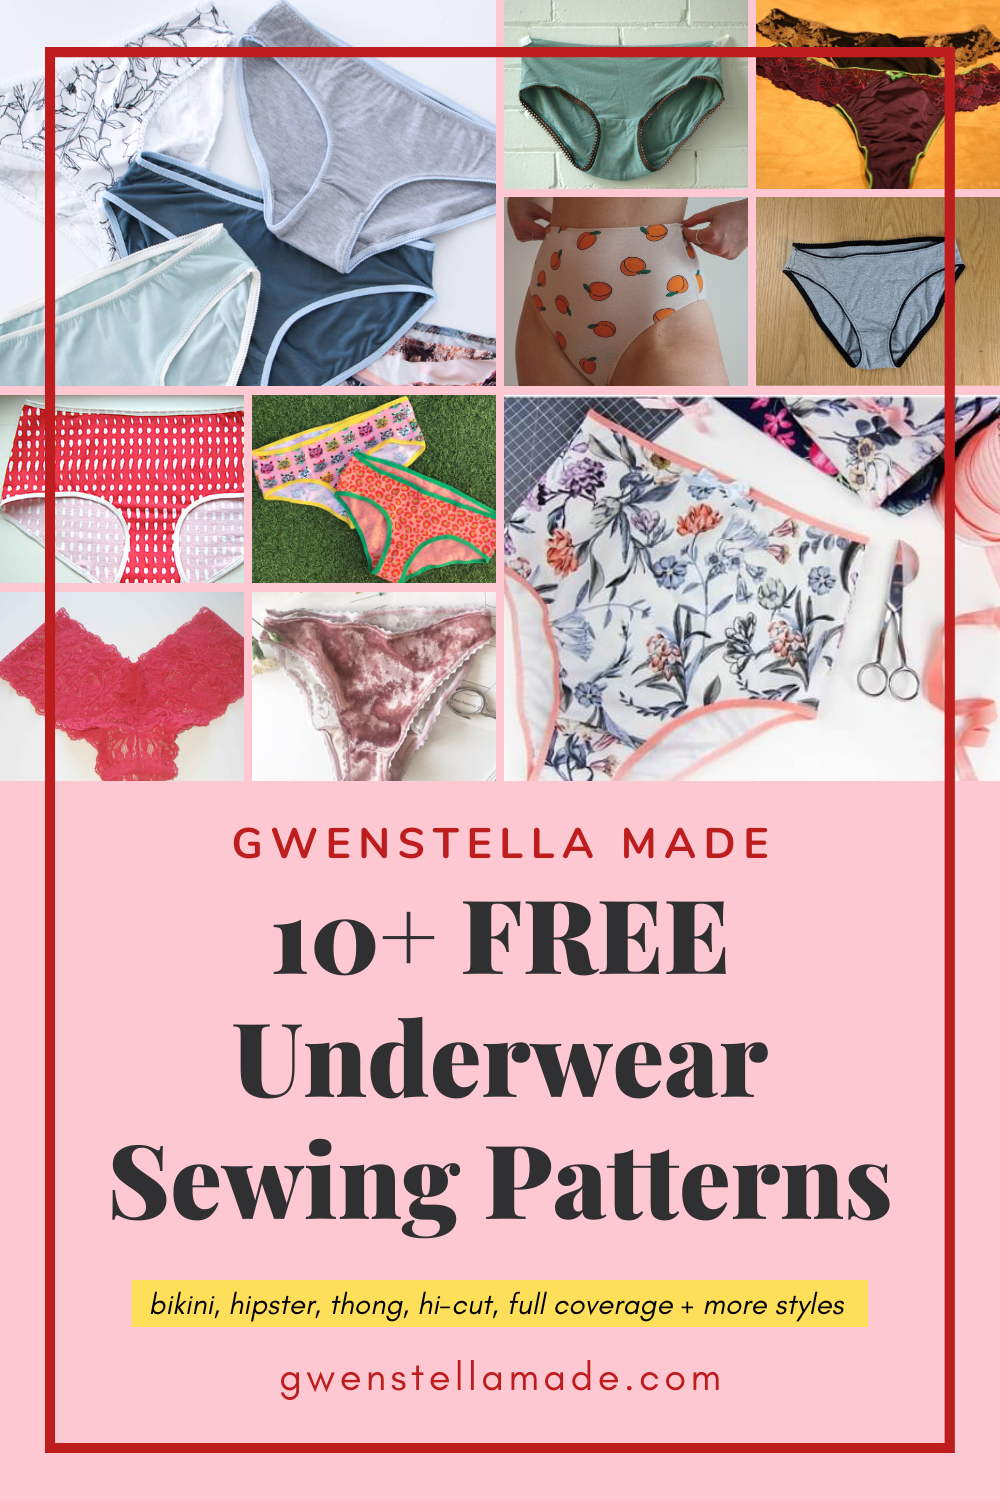 10+ FREE Underwear Sewing Patterns To Begin Your Lingerie Sewing Adventure  — Gwenstella Made